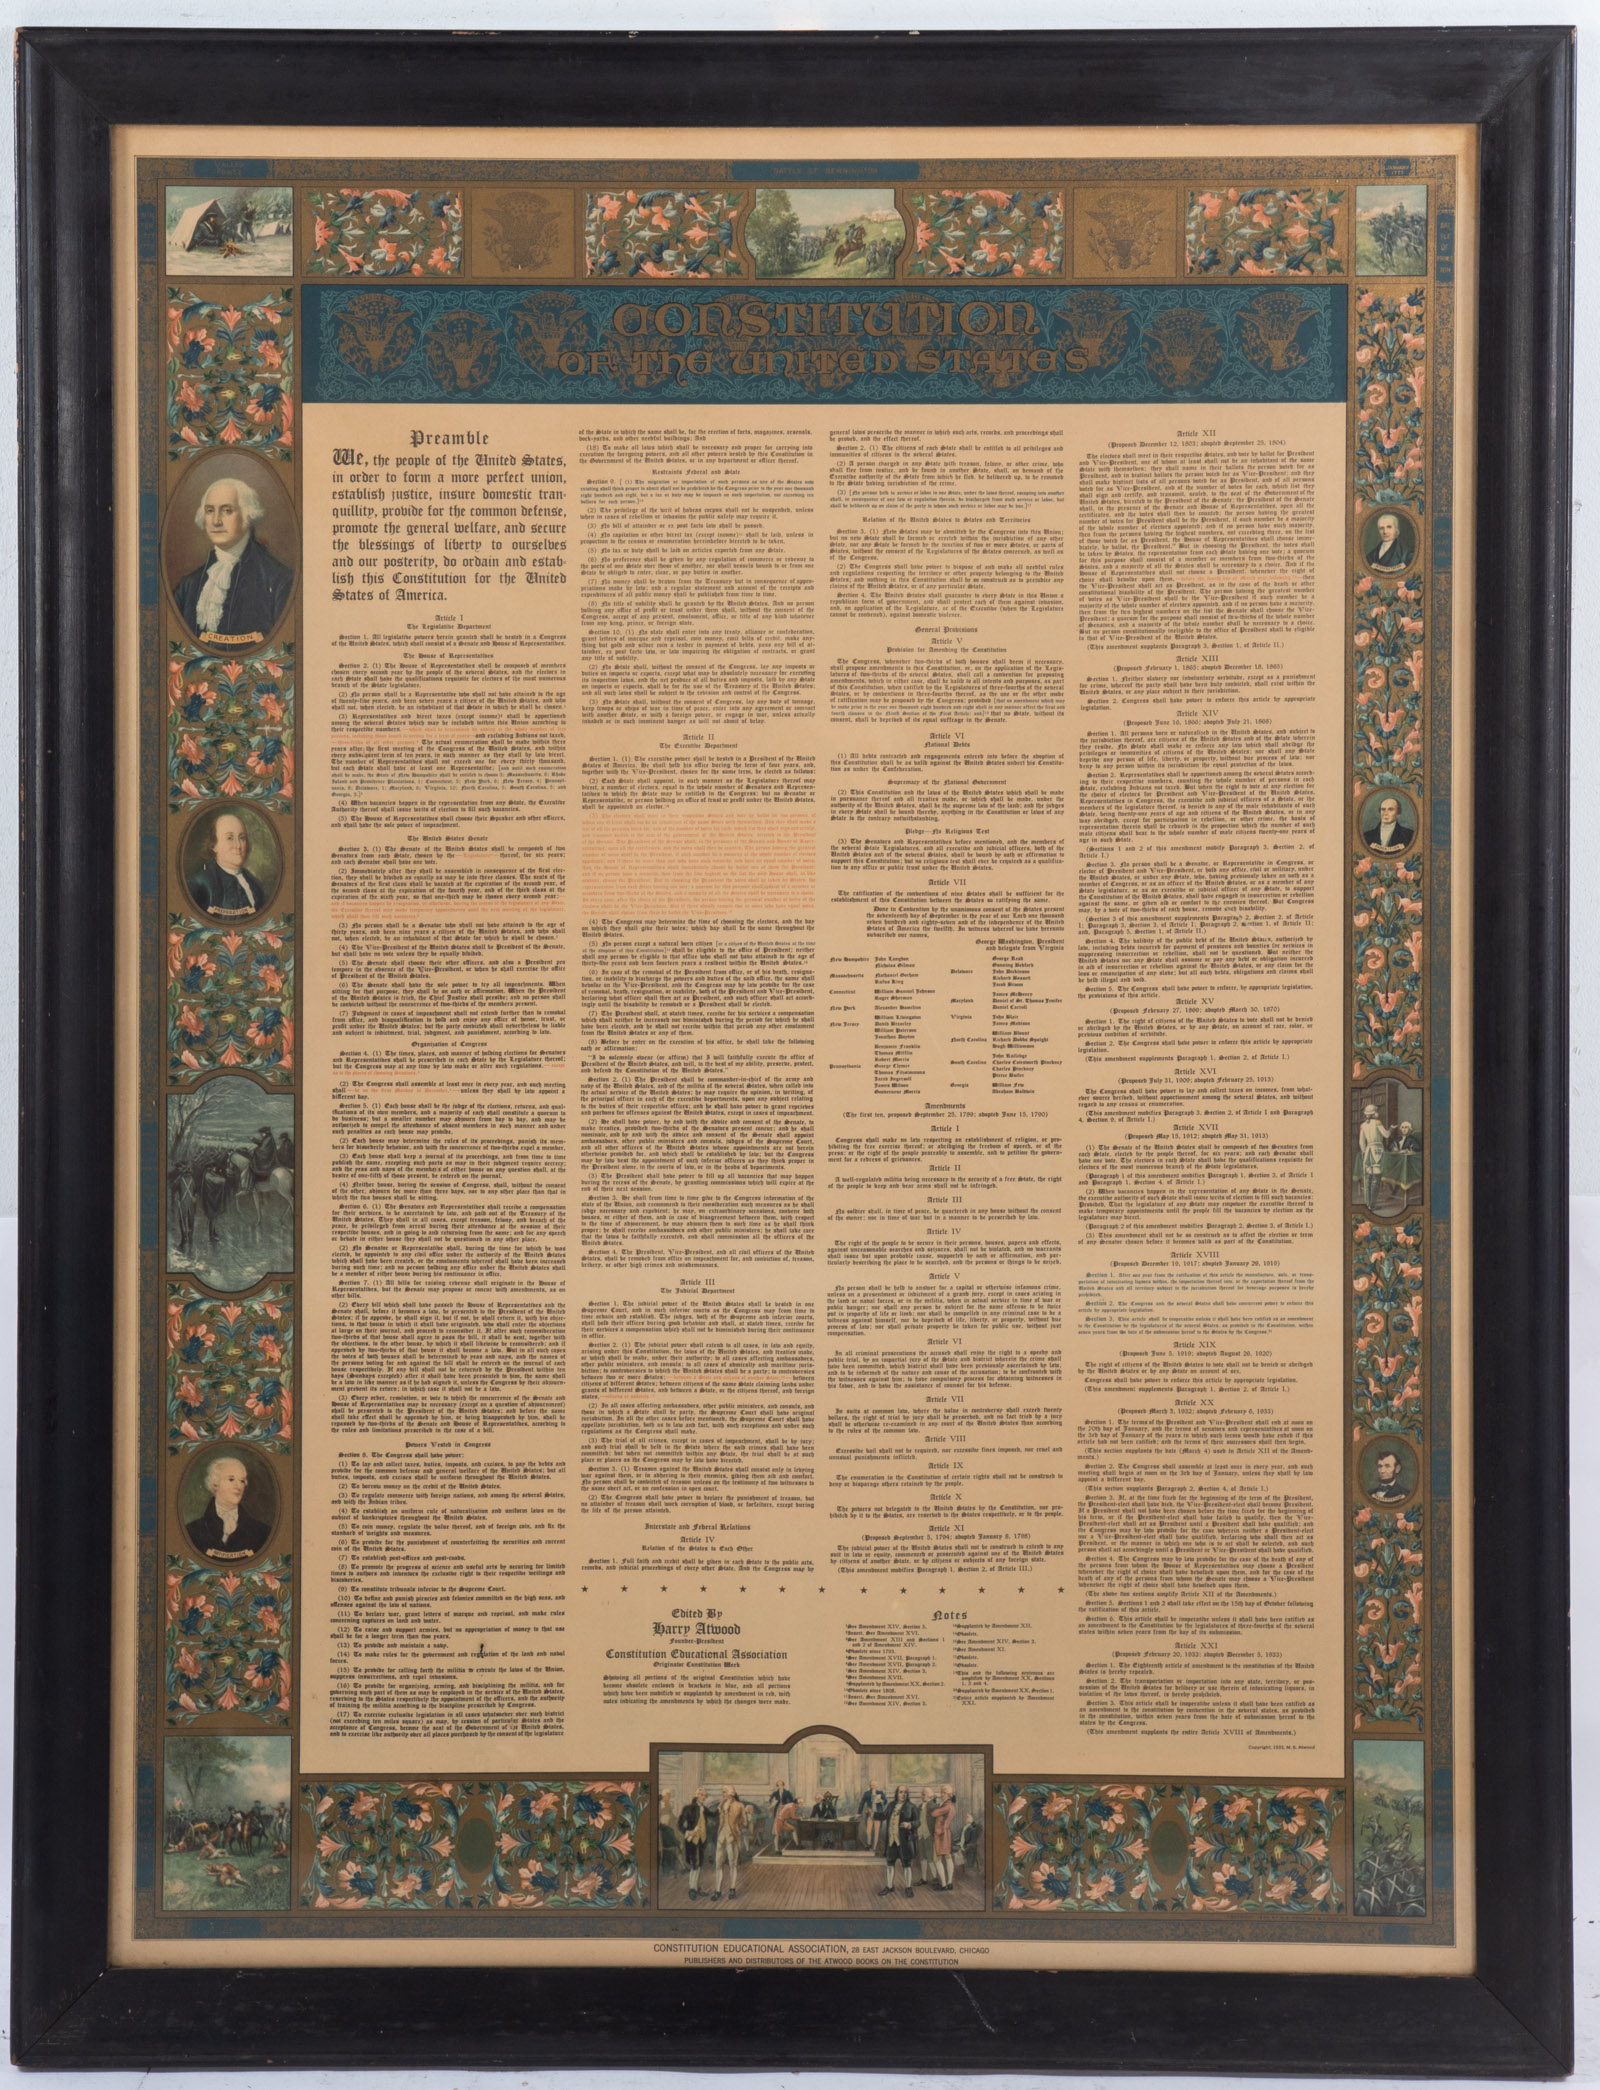 1933 CHROMOLITHOGRAPH OF THE U.S. CONSTITUTION